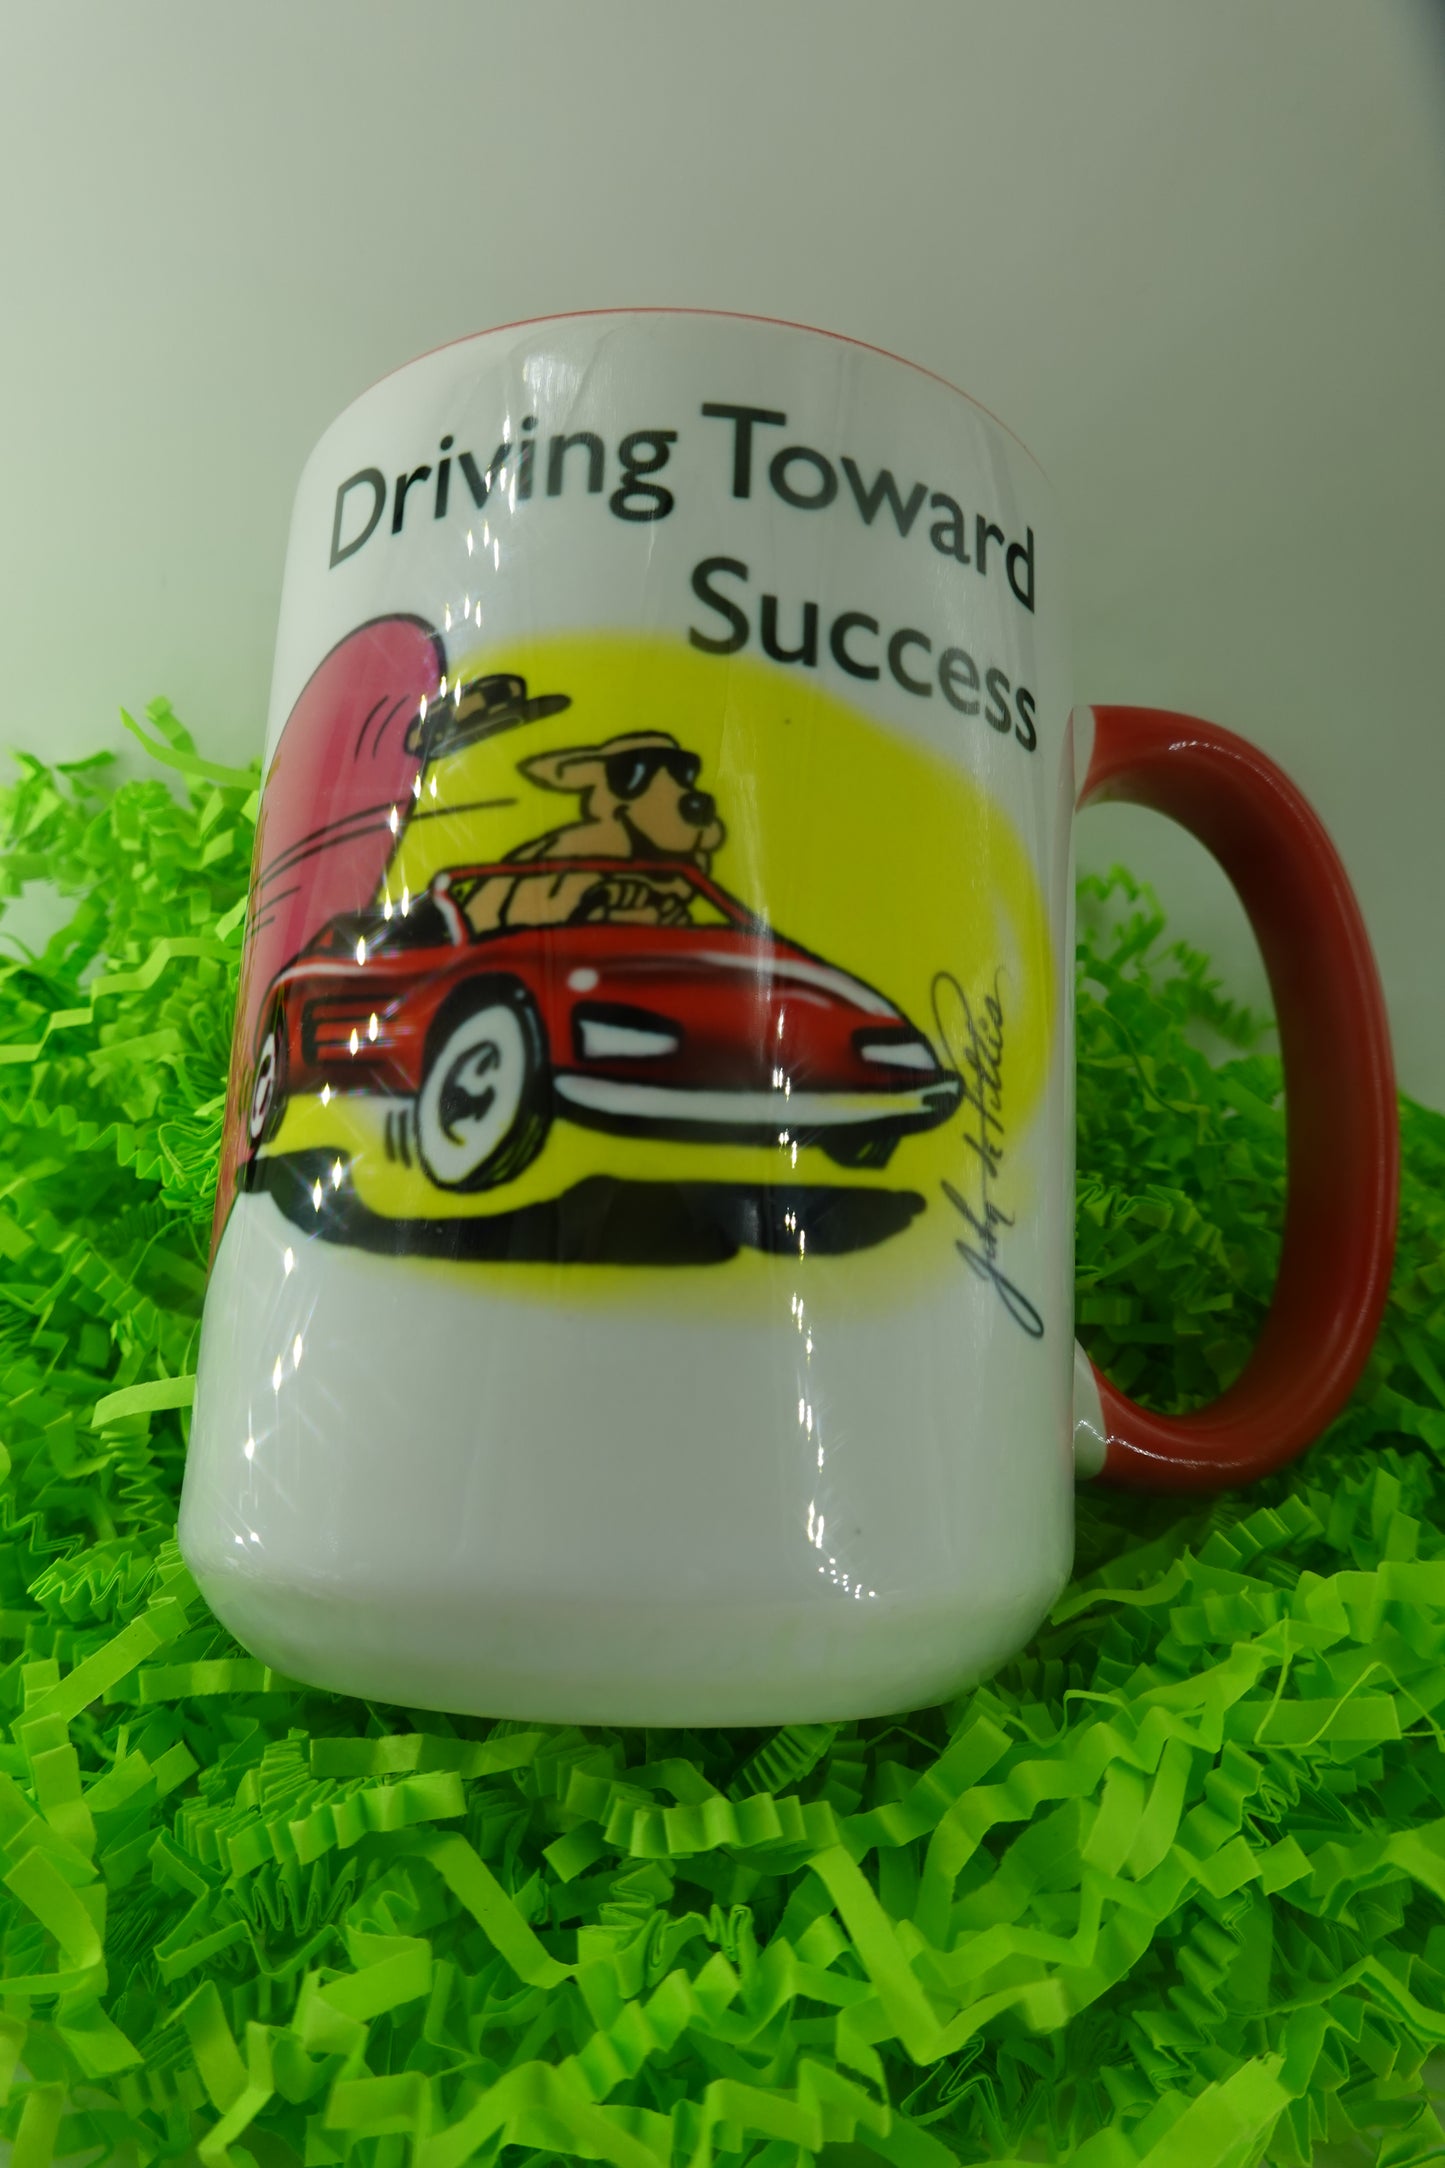 His & Hers: 15oz Mugs ceramic (Left & right handed) "Half-A-Heart" + 2 Mini BMW Cars (1:64) Gift Set for Couples